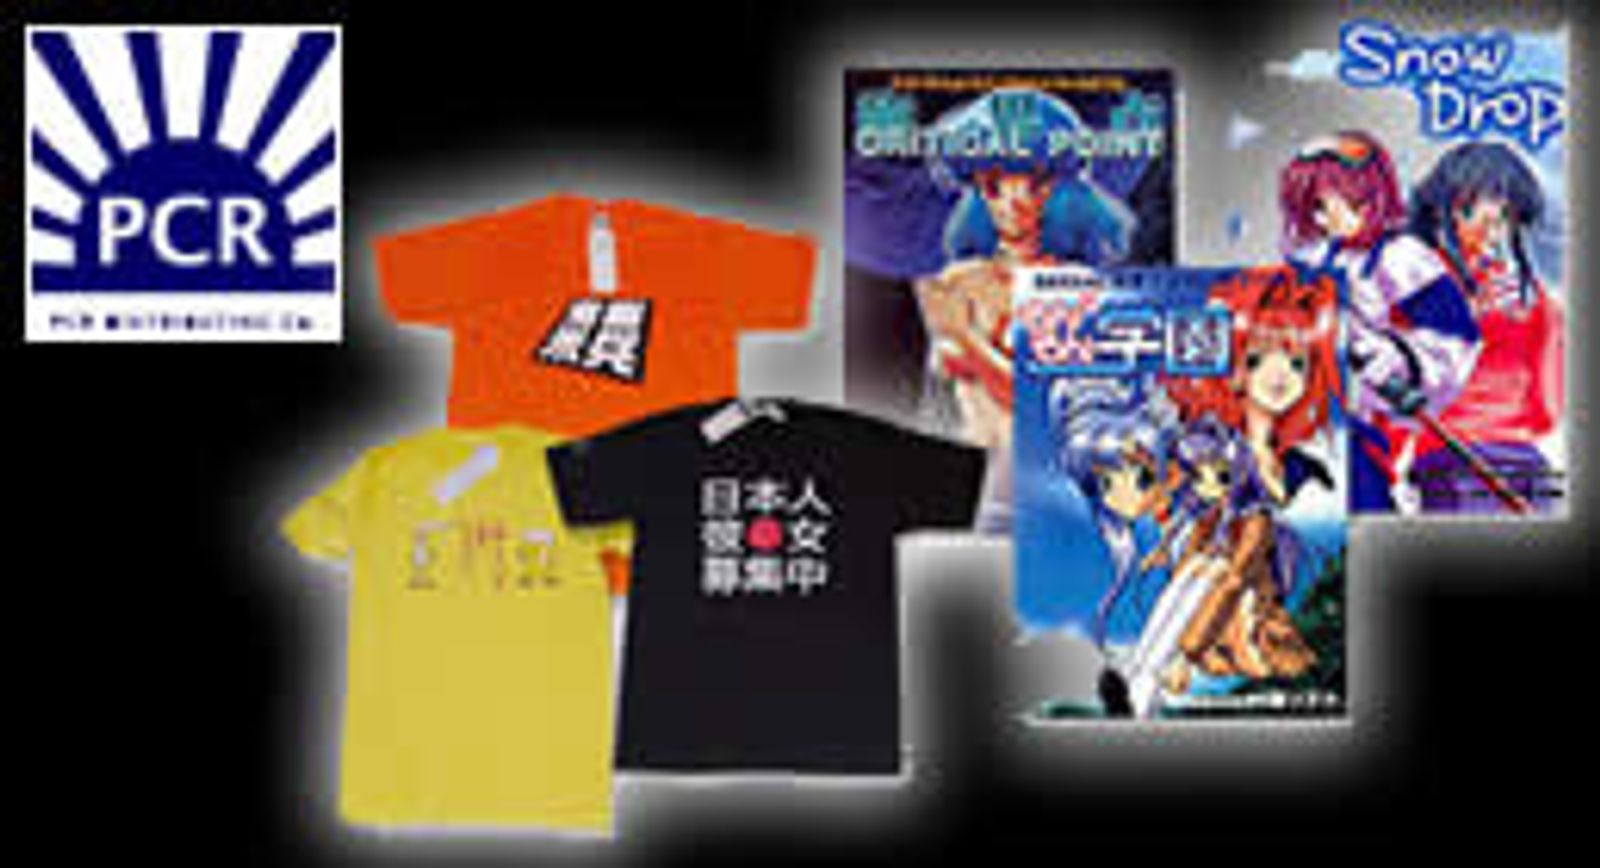 Japanese Adult Computer Games, Shirts Available: PCR